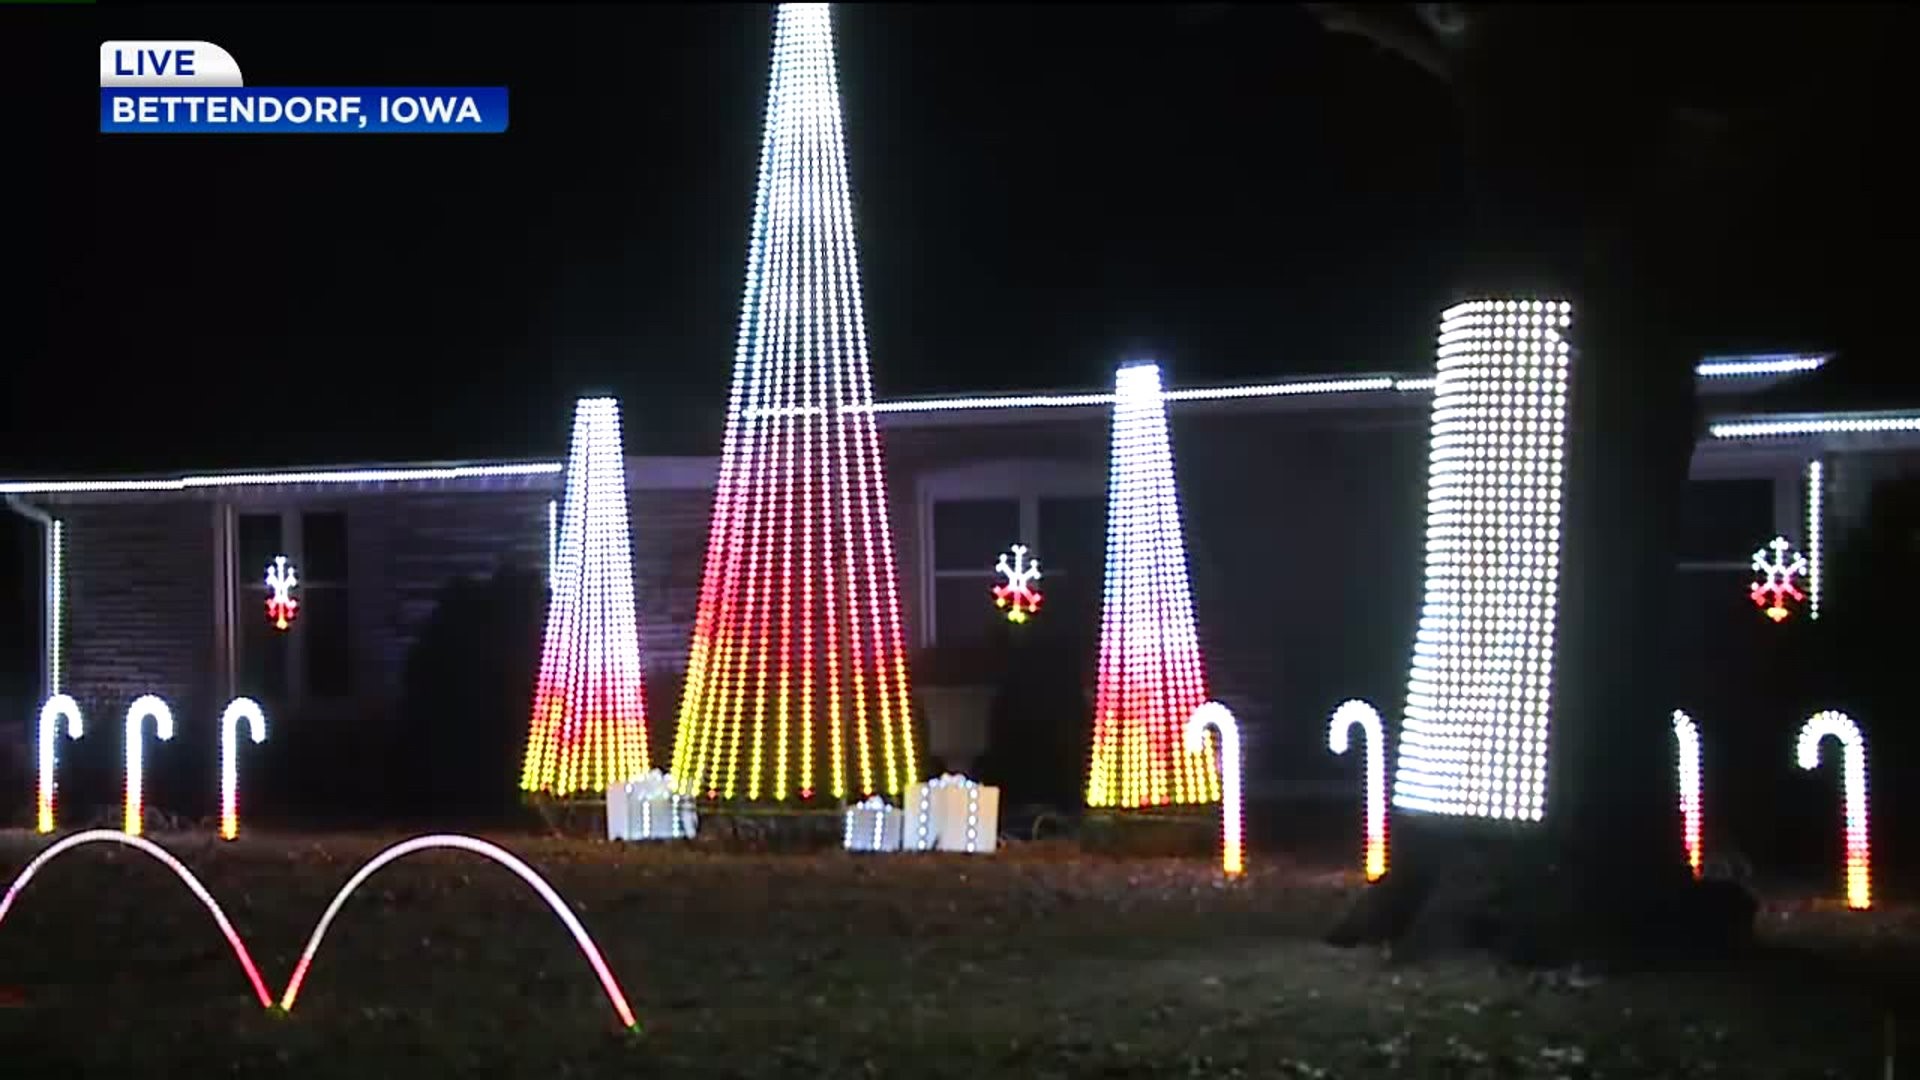 Oakbrook Place Lights in Bettendorf light up the holiday season